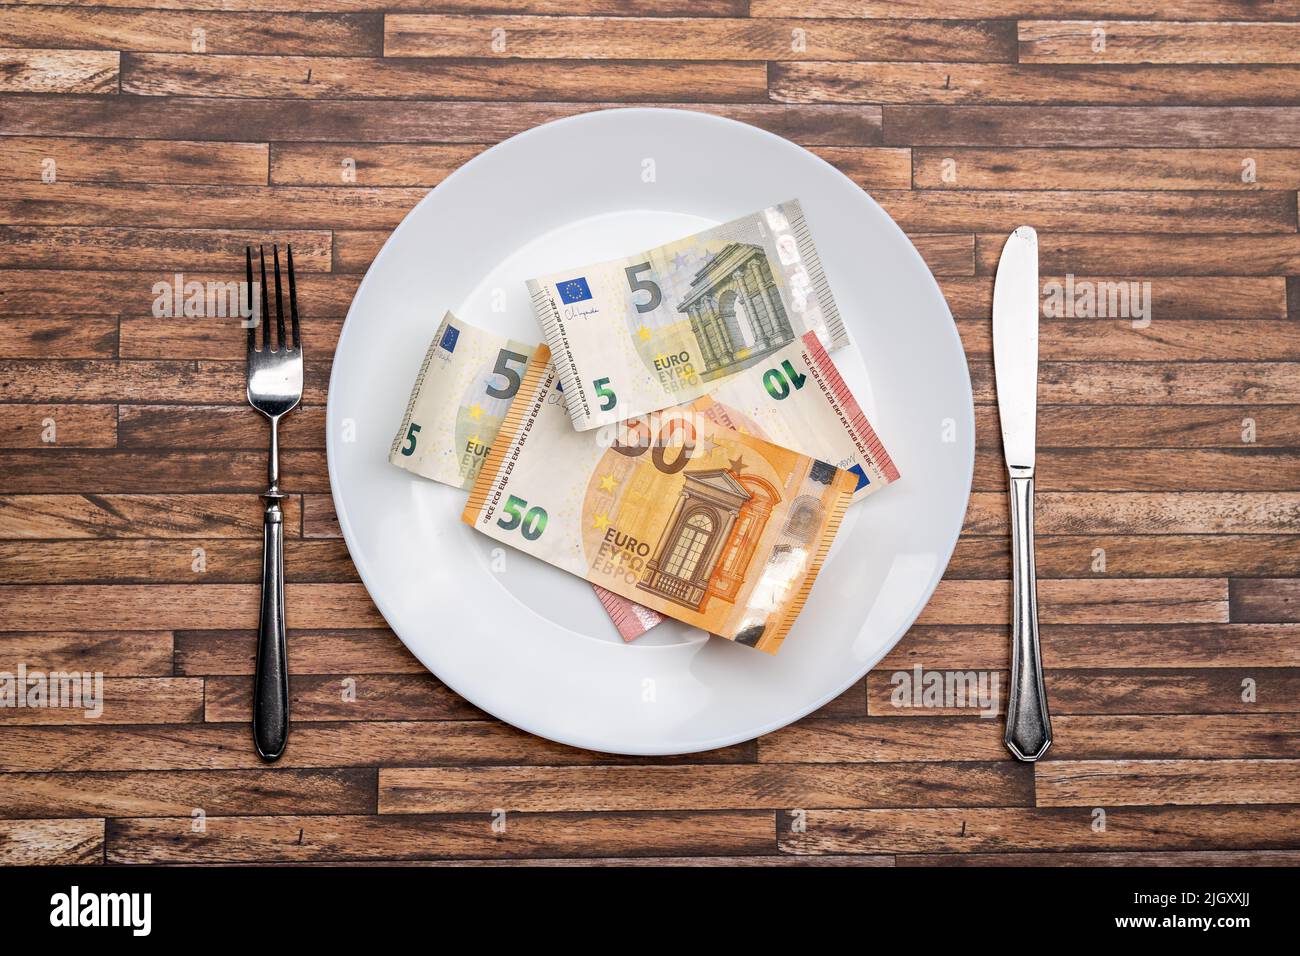 Euro banknotes lying on a dinner plate with cutlery on the table. Symbolic image for eating money notes. Food is getting expensive due to inflation. Stock Photo